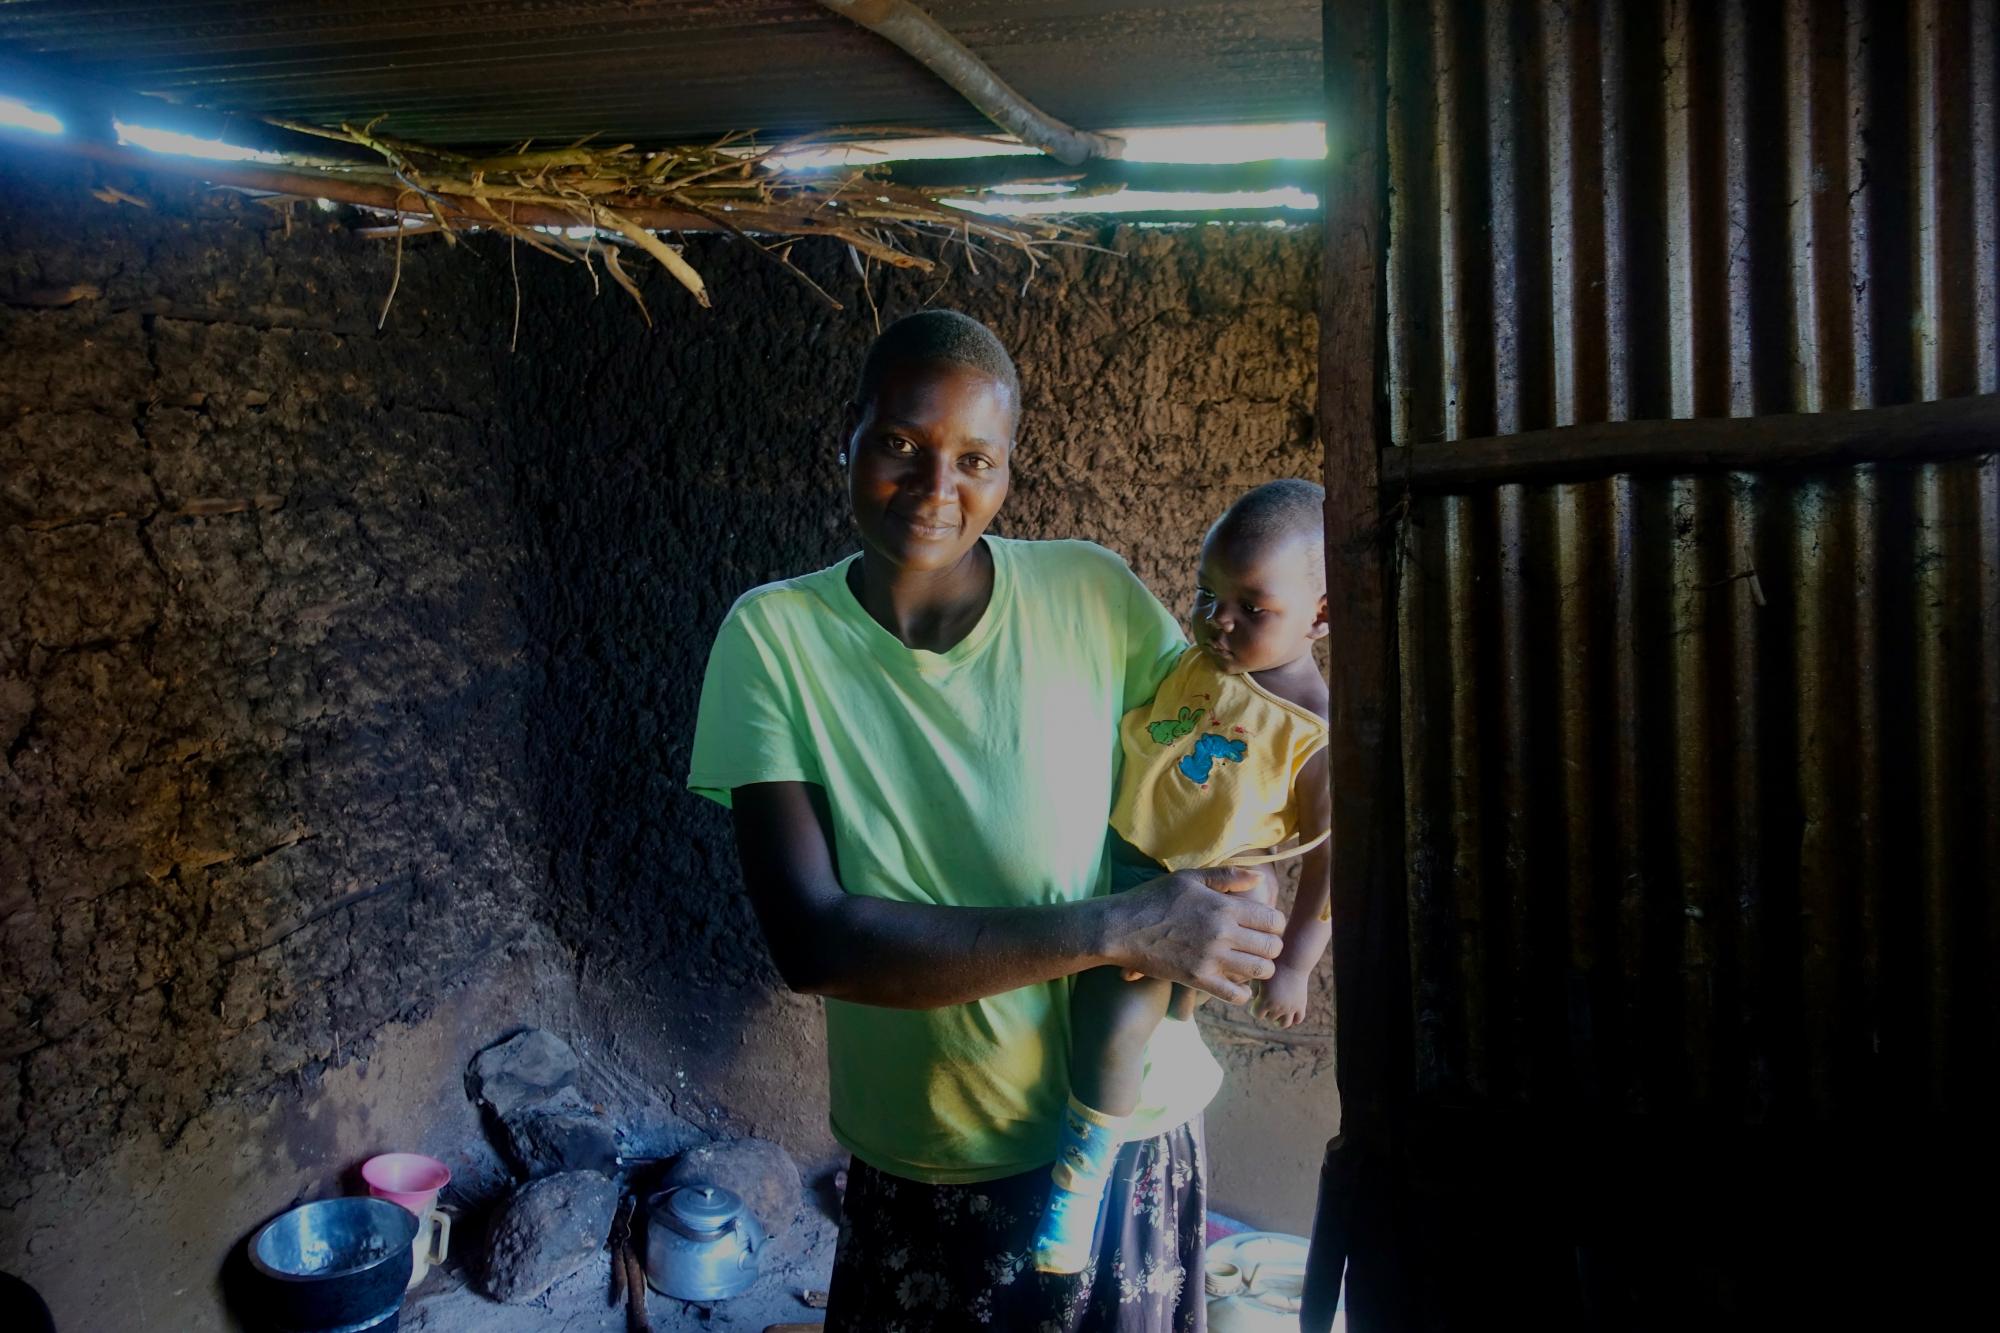 Photo 10: Woman with child inside a house.